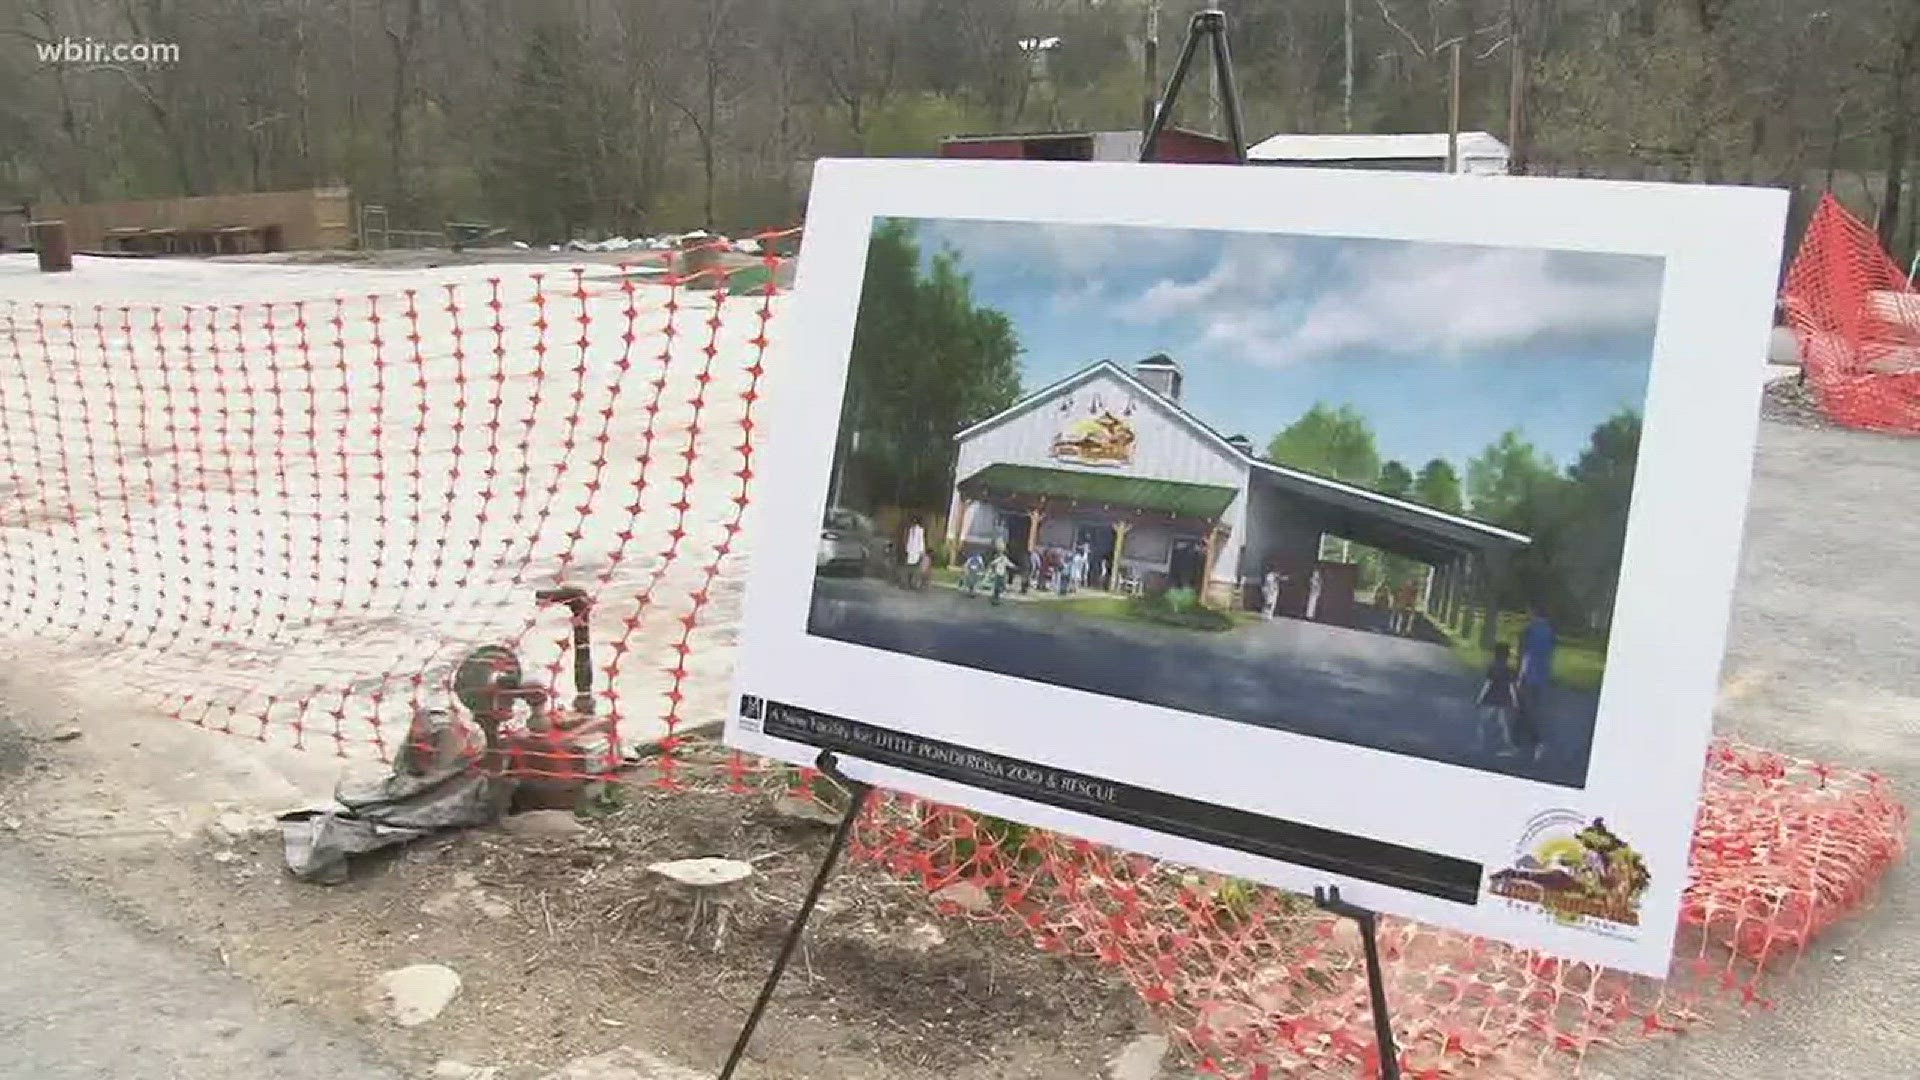 March 19, 2018: A donation by some Knoxville architects is helping pave the way for a new barn at Little Ponderosa Zoo.